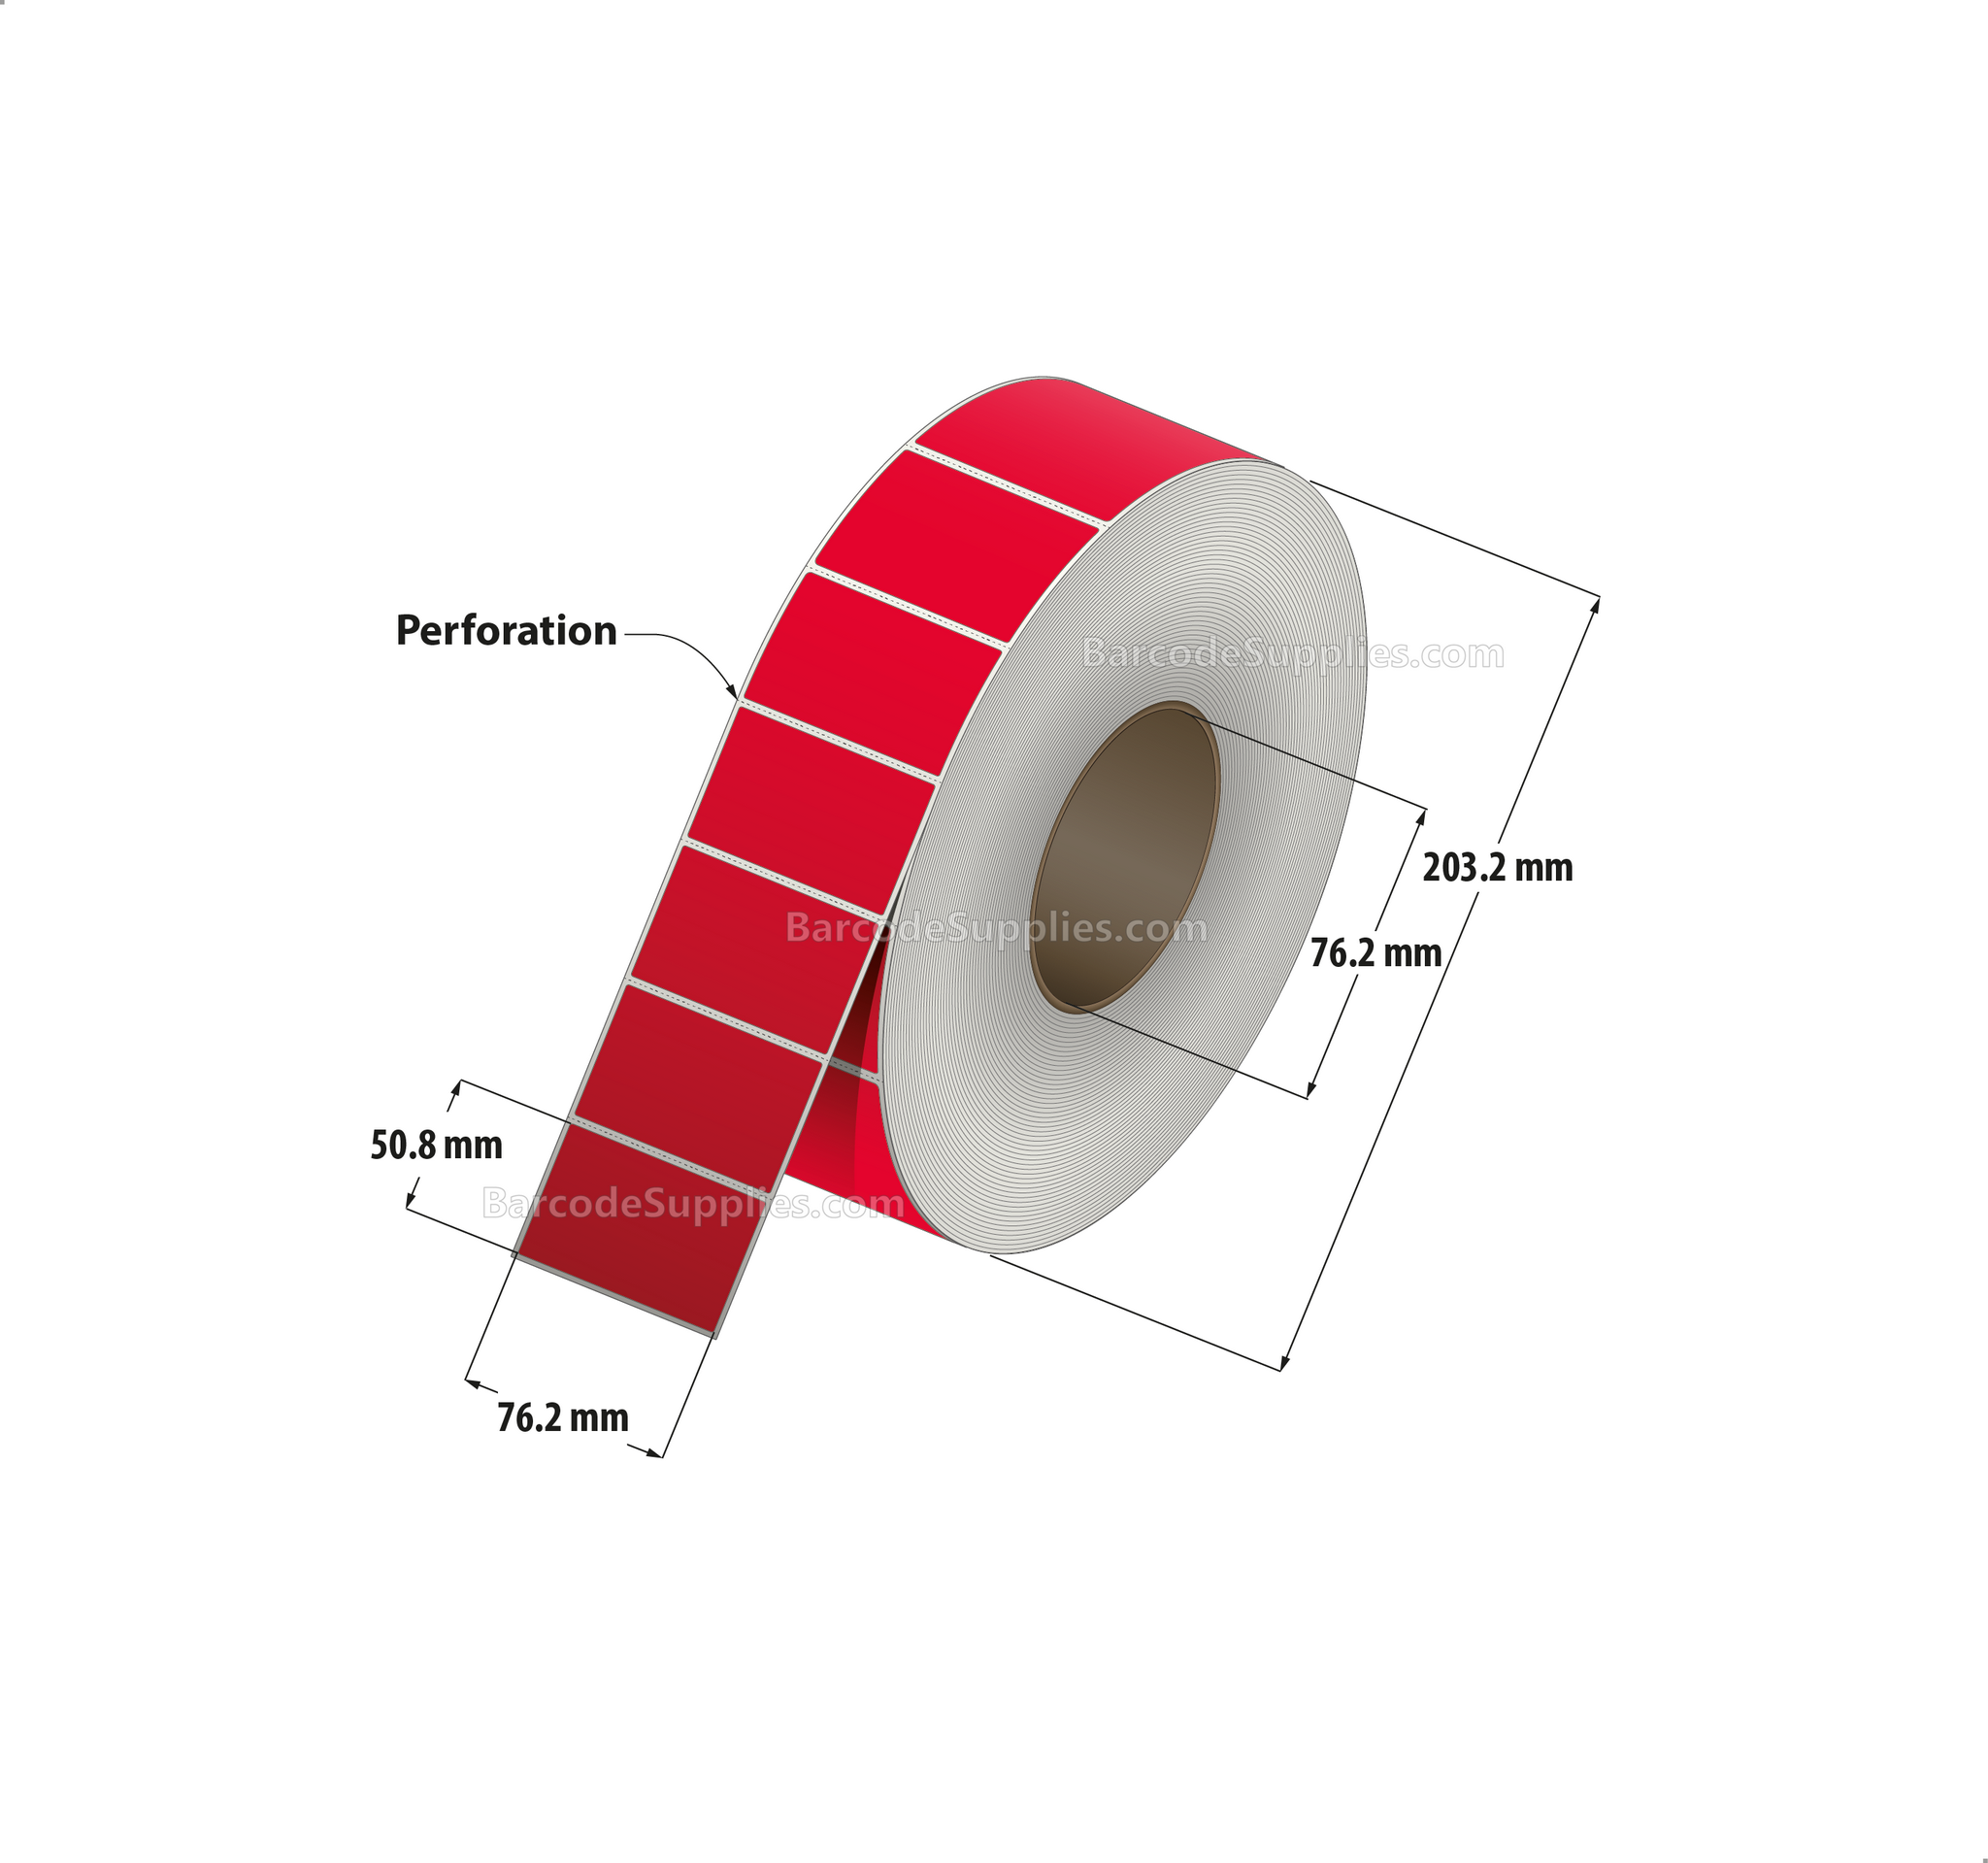 3 x 2 Thermal Transfer 032 Red Labels With Permanent Adhesive - Perforated - 2900 Labels Per Roll - Carton Of 8 Rolls - 23200 Labels Total - MPN: RFC-3-2-2900-RD